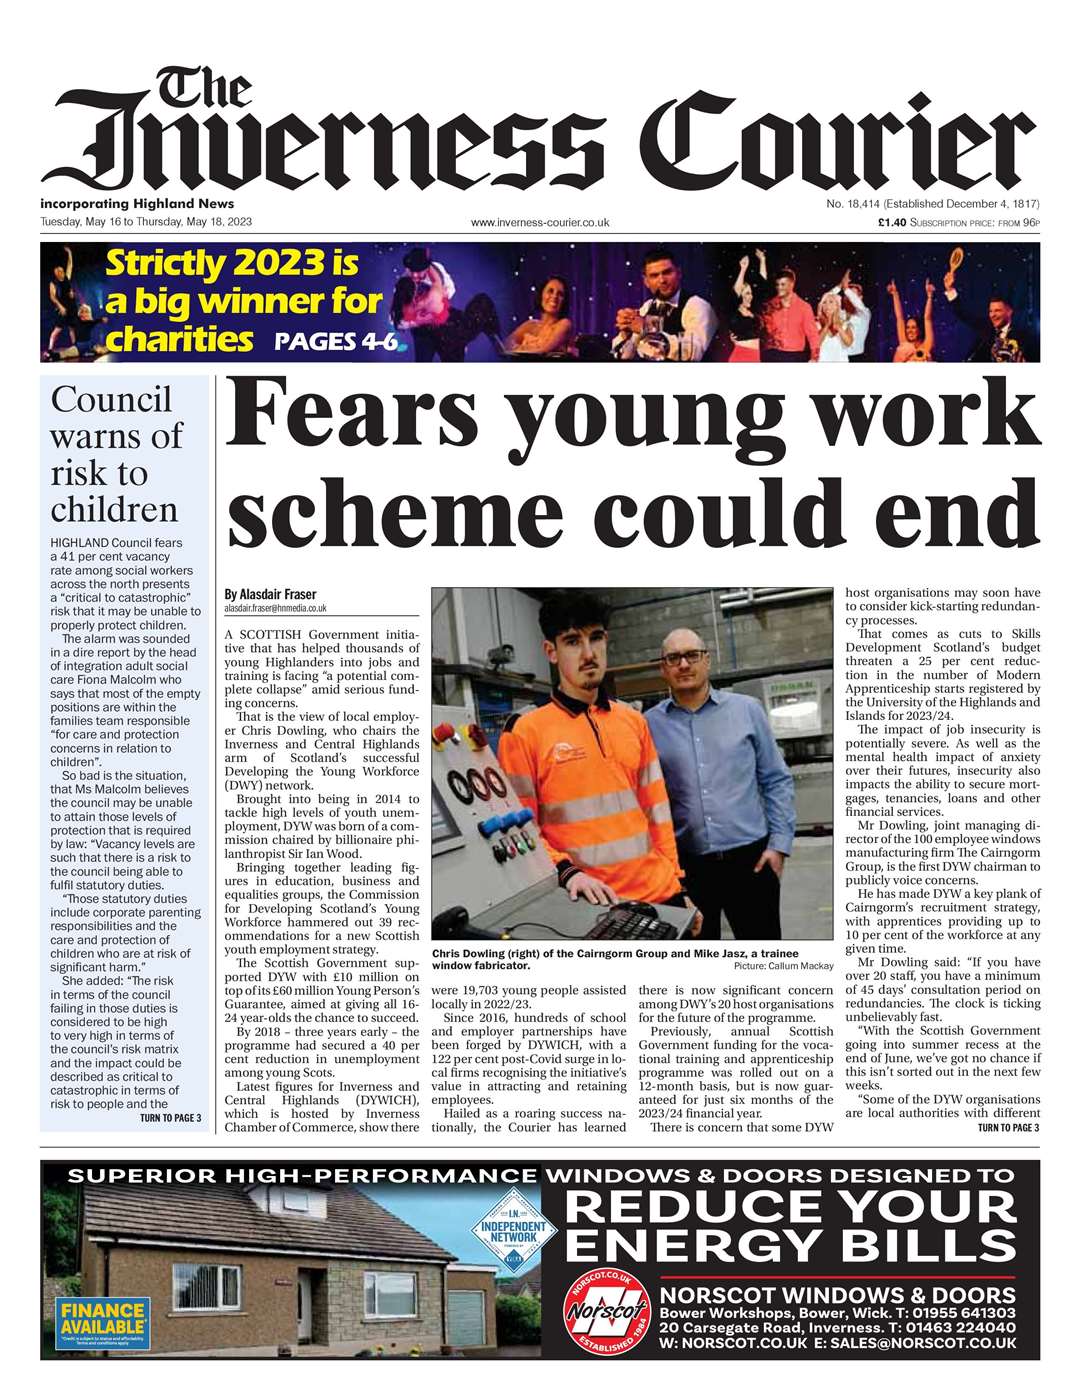 The Inverness Courier, May 16, front page.